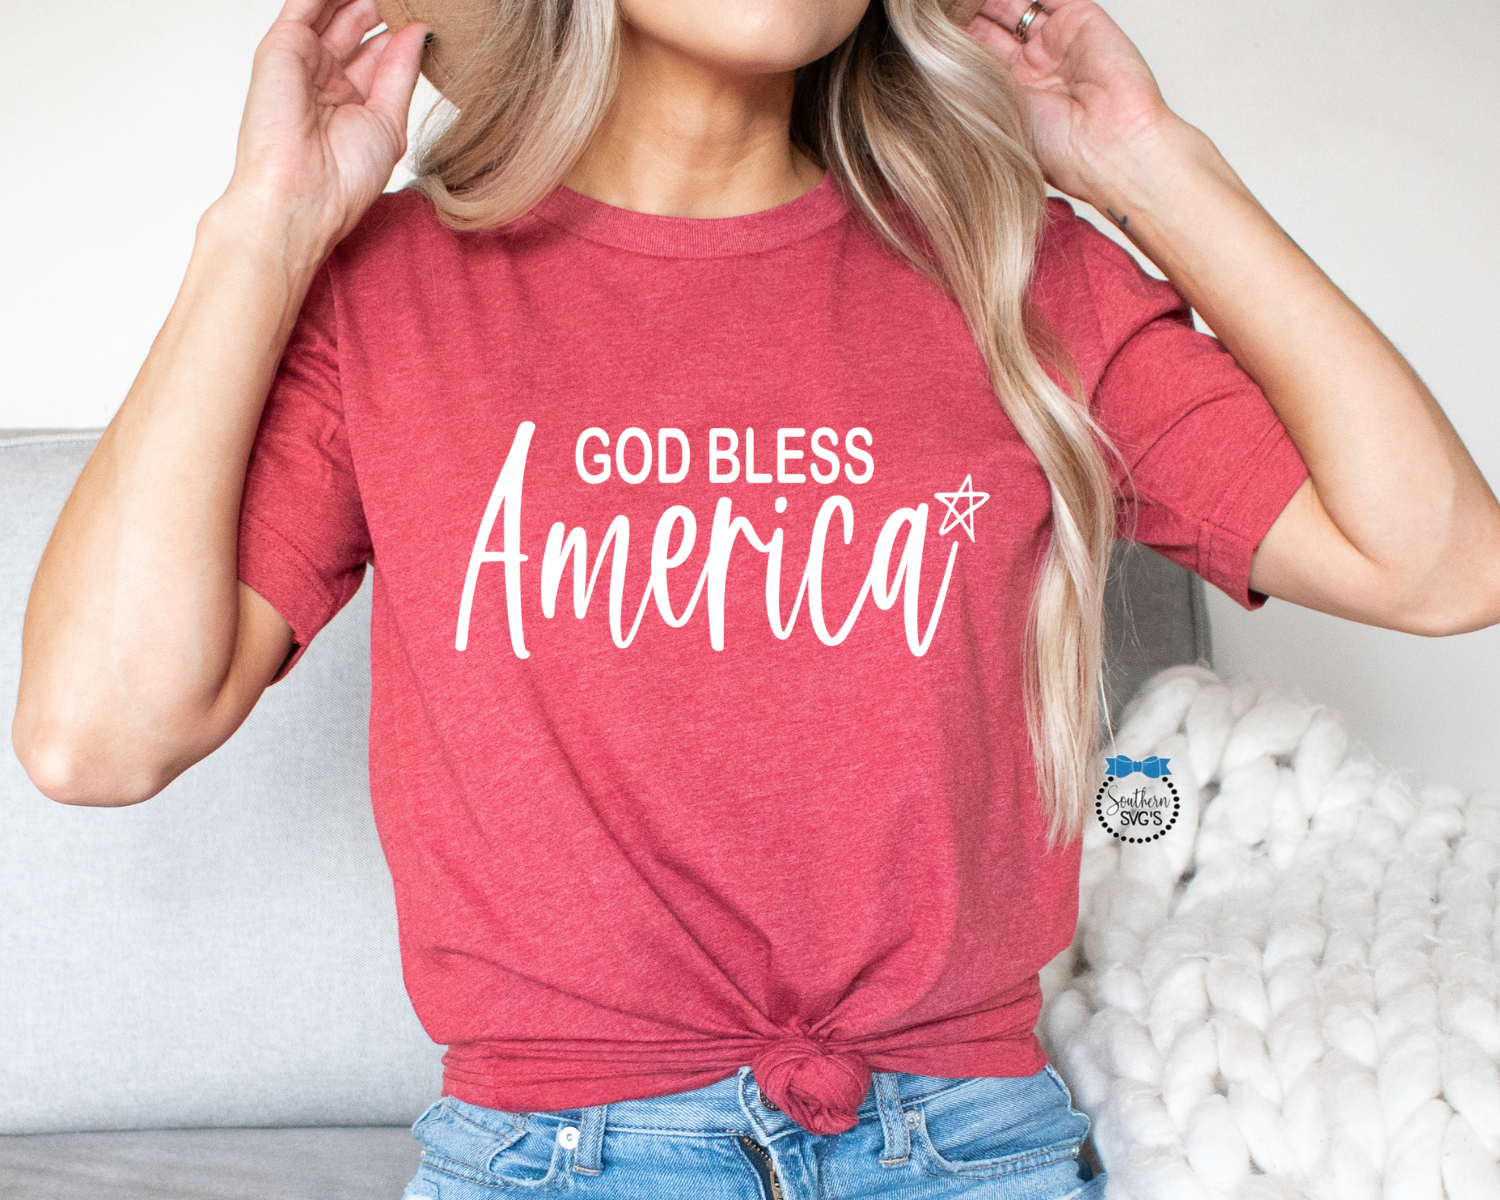 4th Of July SvG, God Bless America PNG, Fourth Of July PnG, UV DTF, Black PnG Included, Cricut Cut File, Silhouette Cut File Download